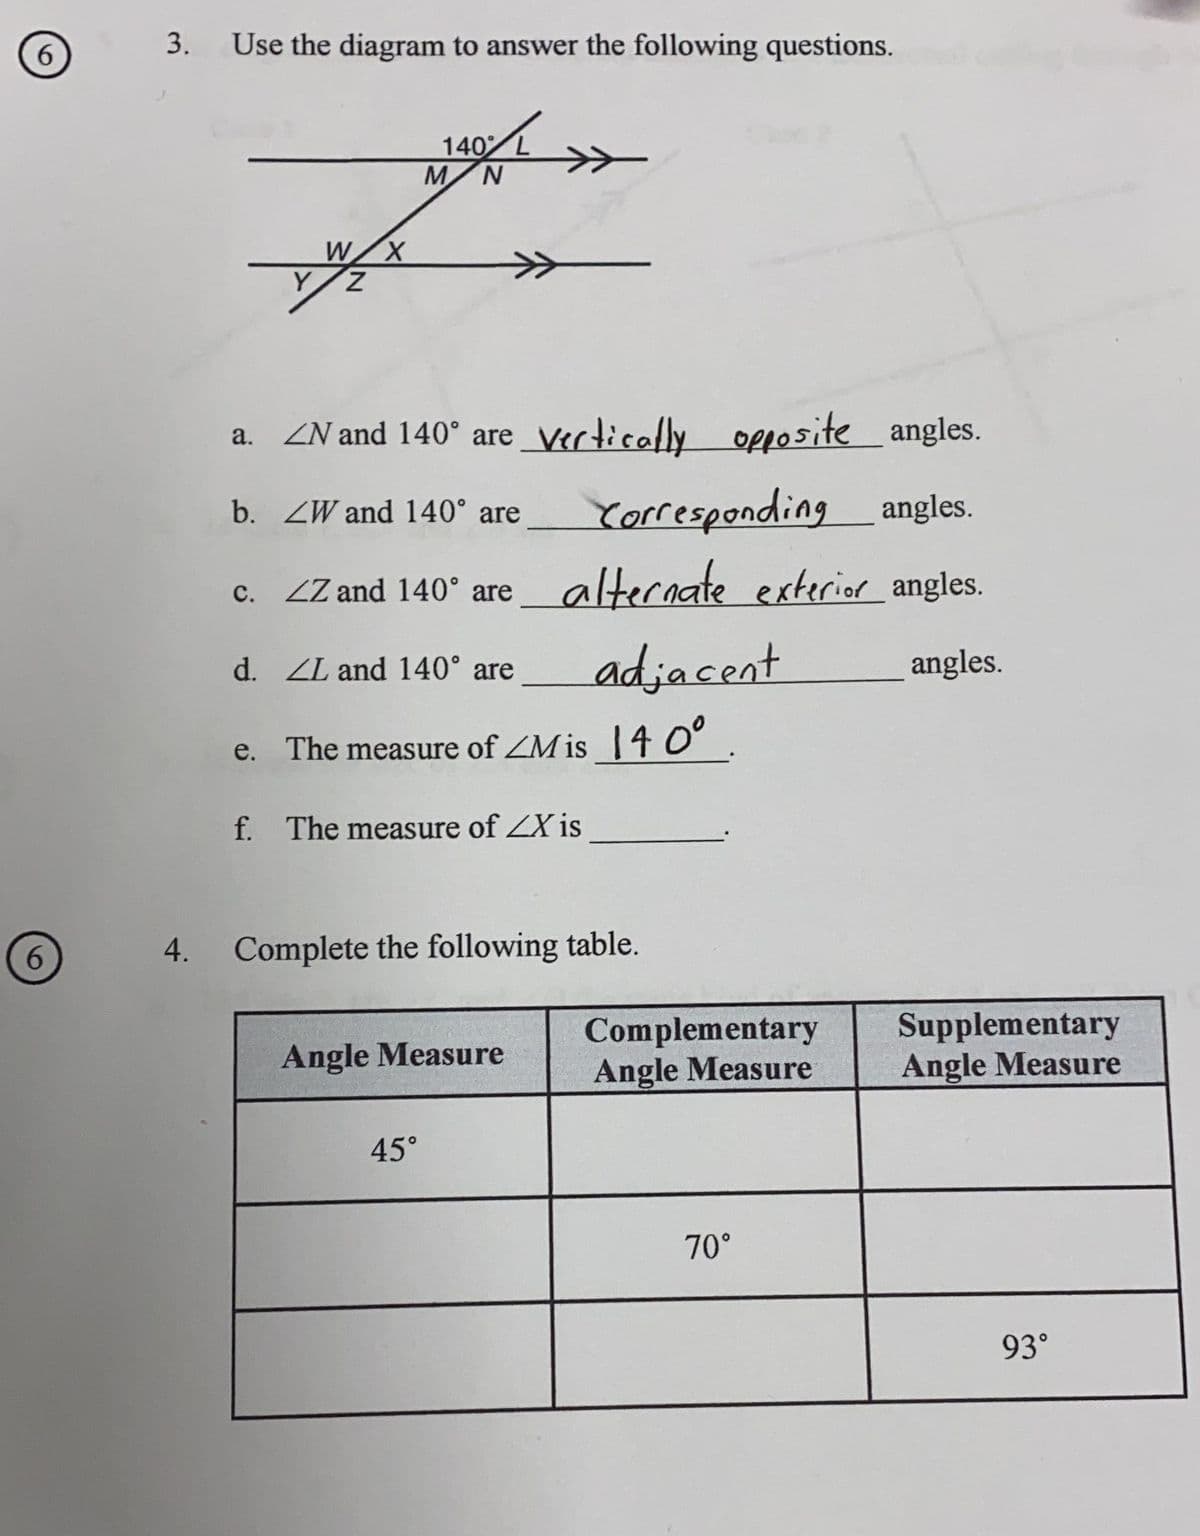 6
6
3.
Use the diagram to answer the following questions.
W X
Y/Z
140 L
MN
a. ZN and 140° are vertically opposite__ angles.
b. ZW and 140° are
Corresponding angles.
alternate exterior angles.
angles.
c. ZZ and 140° are
adjacent
e. The measure of Mis 140°.
f. The measure of ZX is
d. ZL and 140° are
4. Complete the following table.
45°
Angle Measure
Complementary
Angle Measure
70°
Supplementary
Angle Measure
93⁰